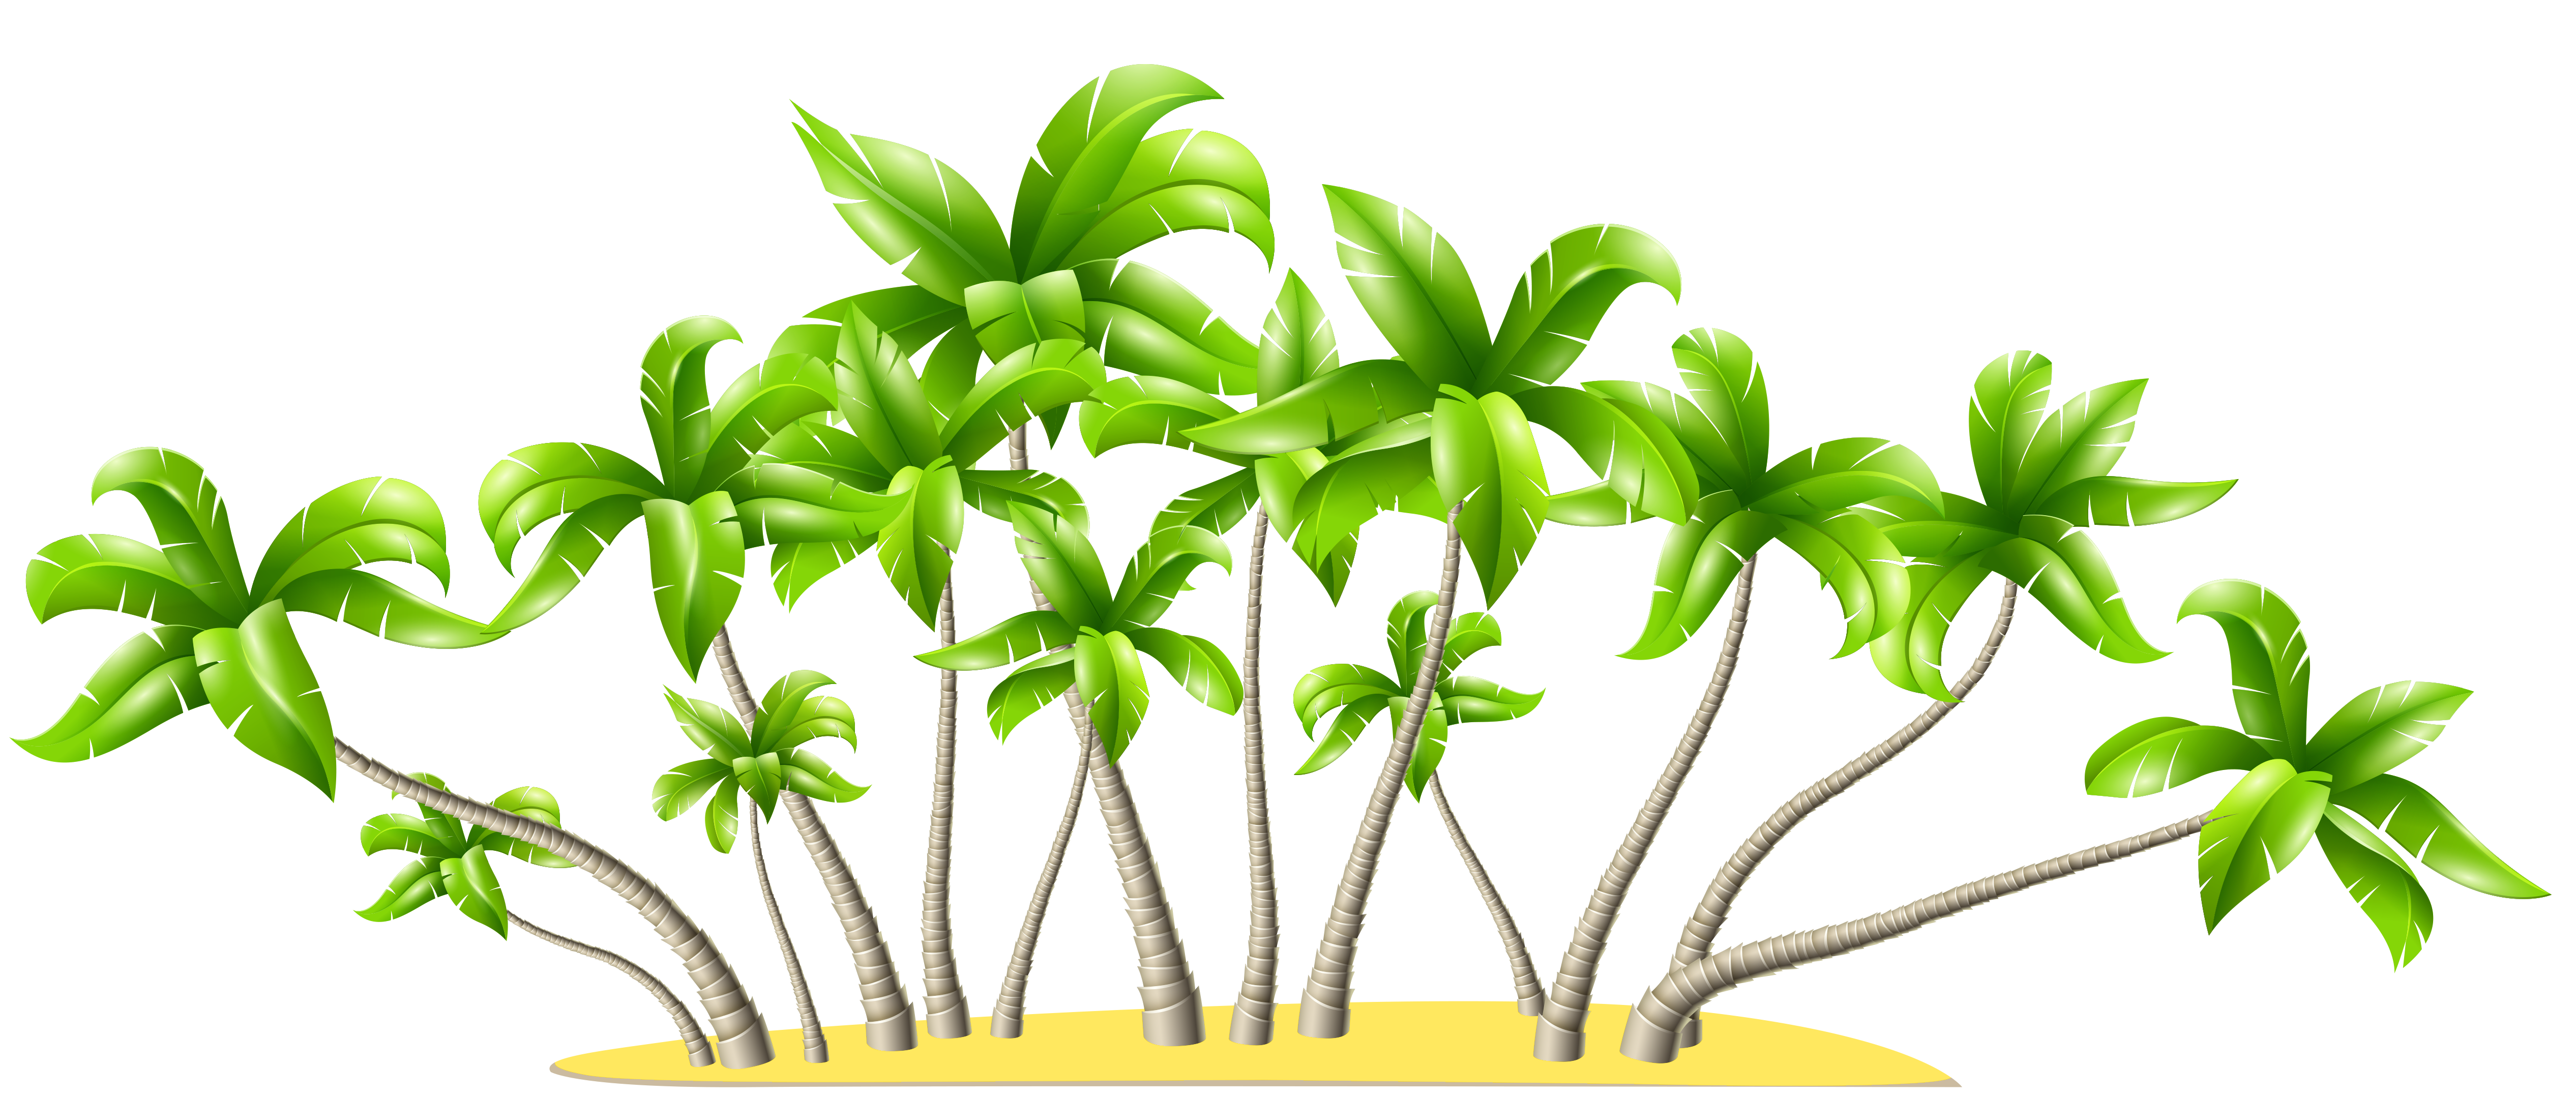 free clipart images palm trees - photo #42